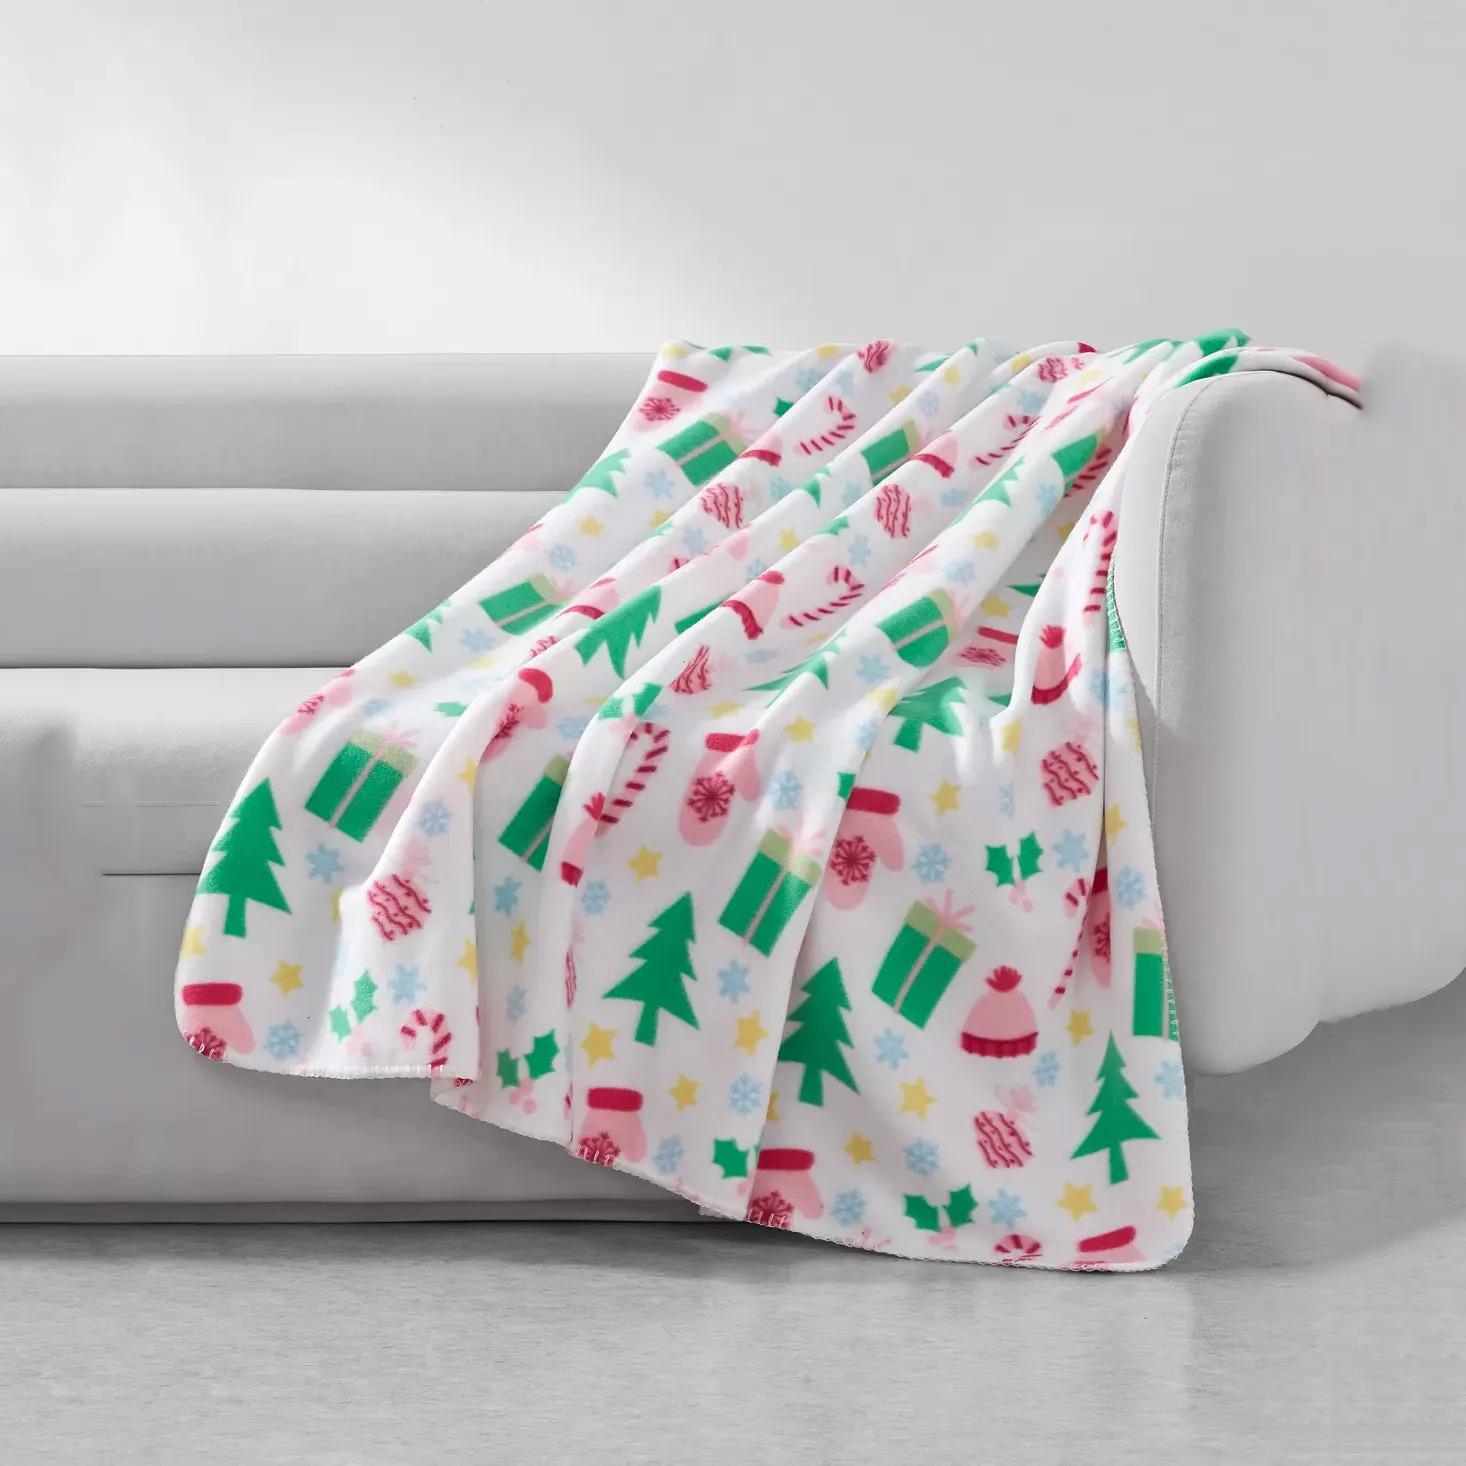 Birch Trail Holiday Printed Fleece Throw Blanket for $5.99